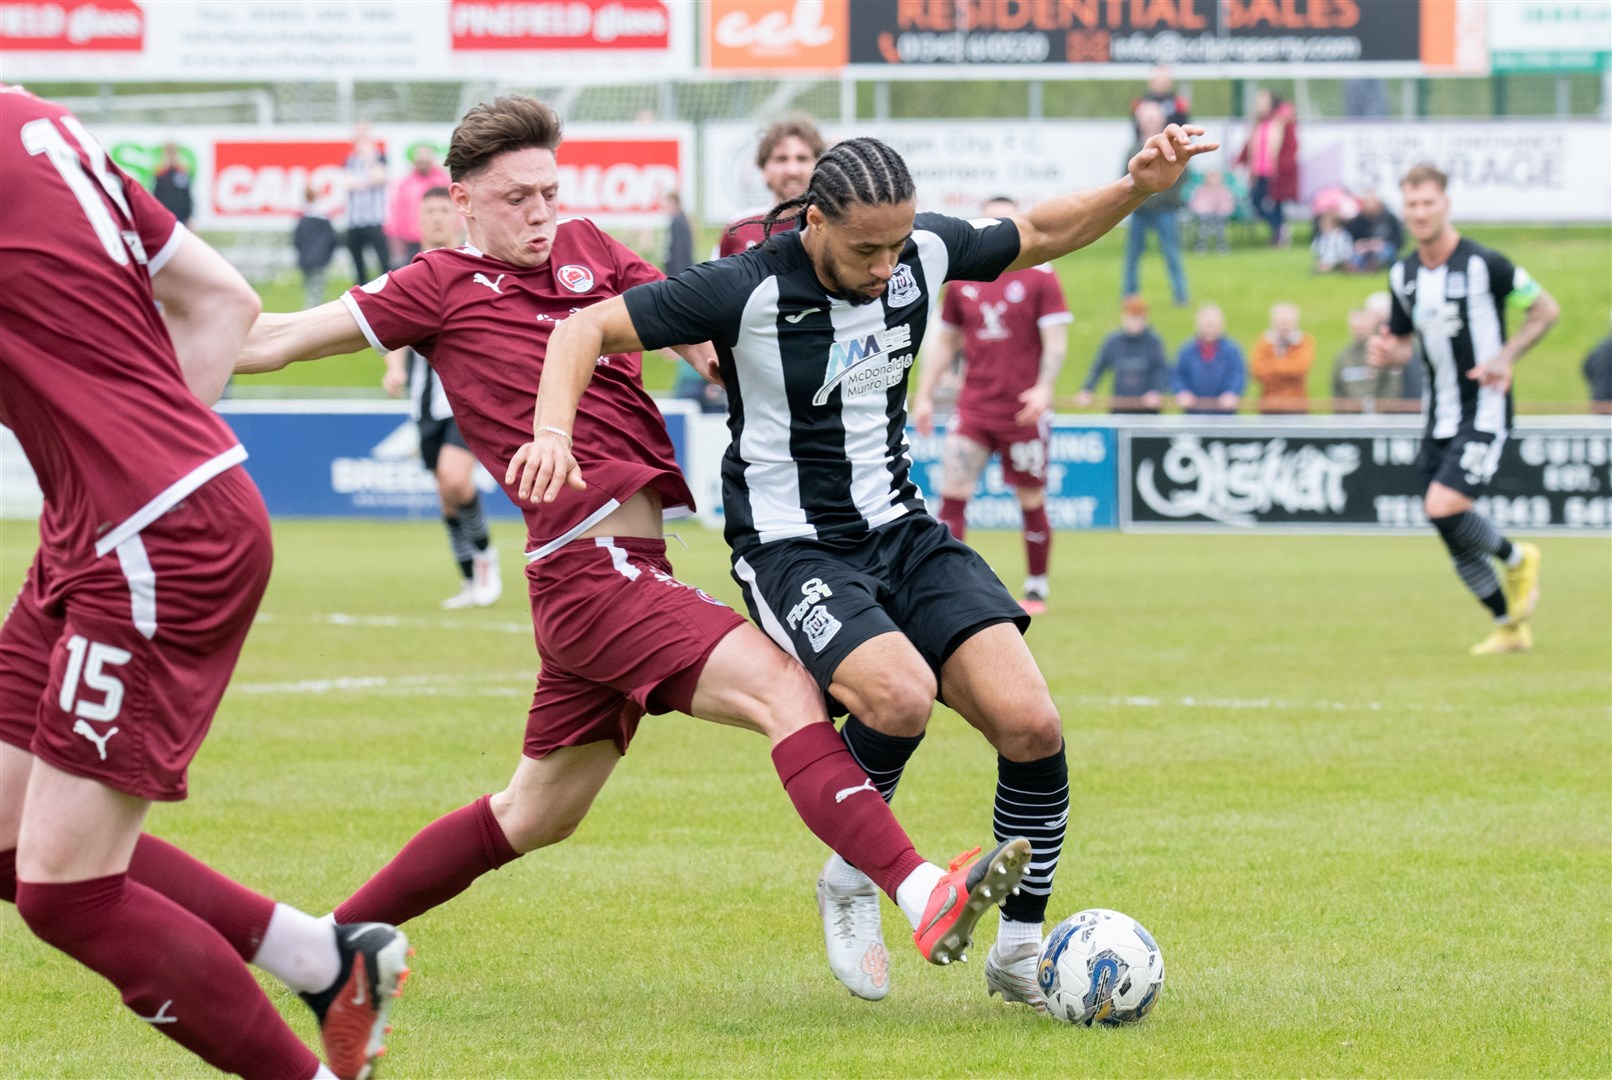 Clyde's Craig Howie goes in for a challenge on Elgin City's Dayshonne Golding. Elgin City FC (0) vs Clyde FC (3) - Scottish League Two 23/24 - Borough Briggs, Elgin 4/5/2024.Picture: Daniel Forsyth.